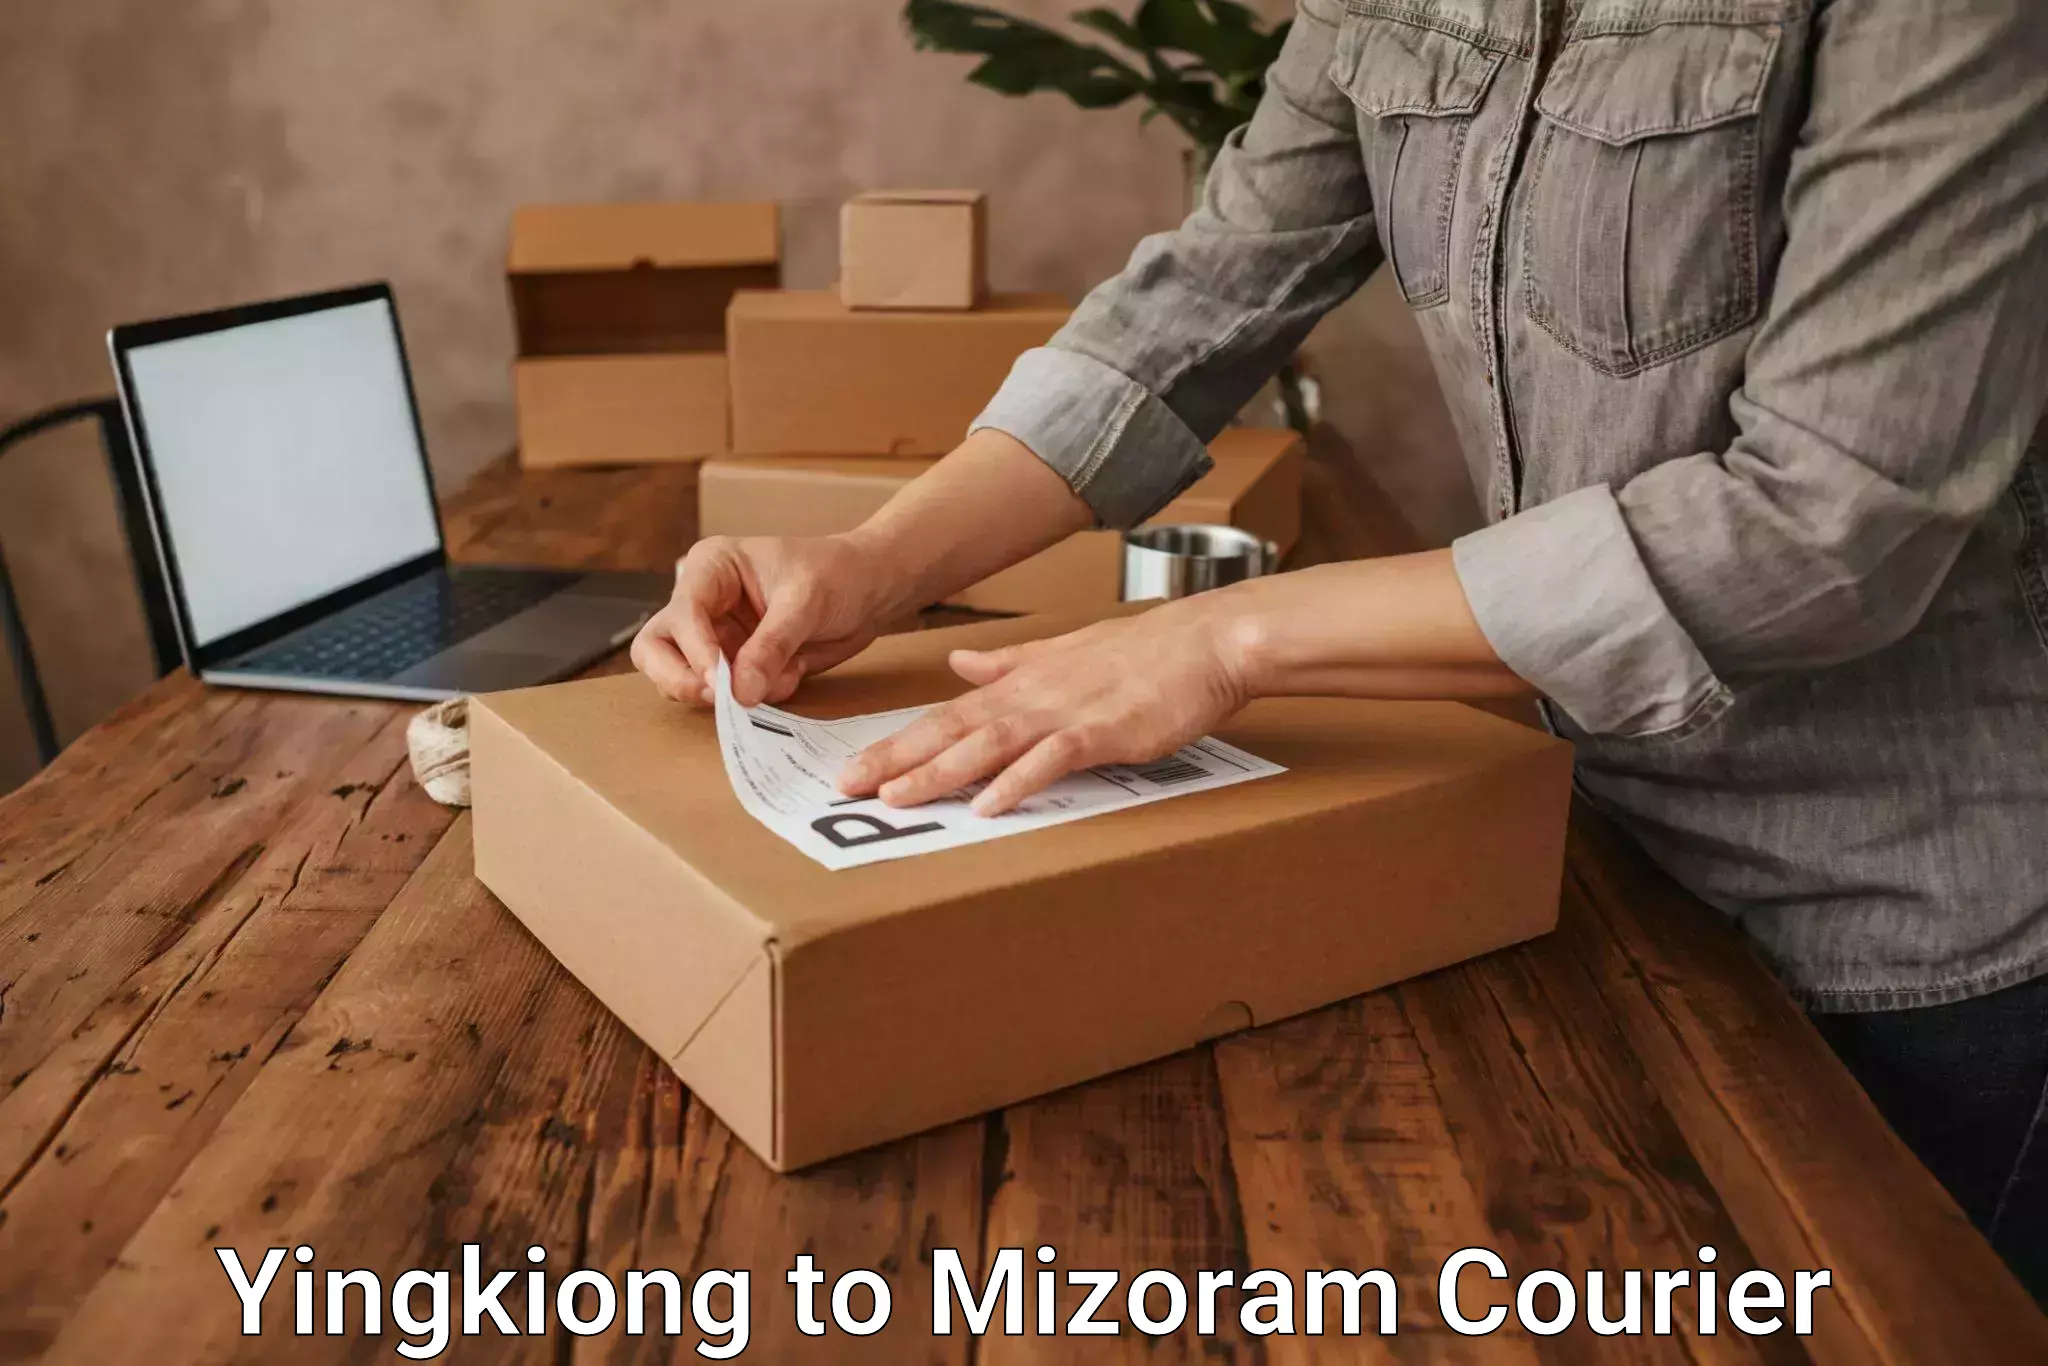 Express delivery capabilities Yingkiong to Mizoram